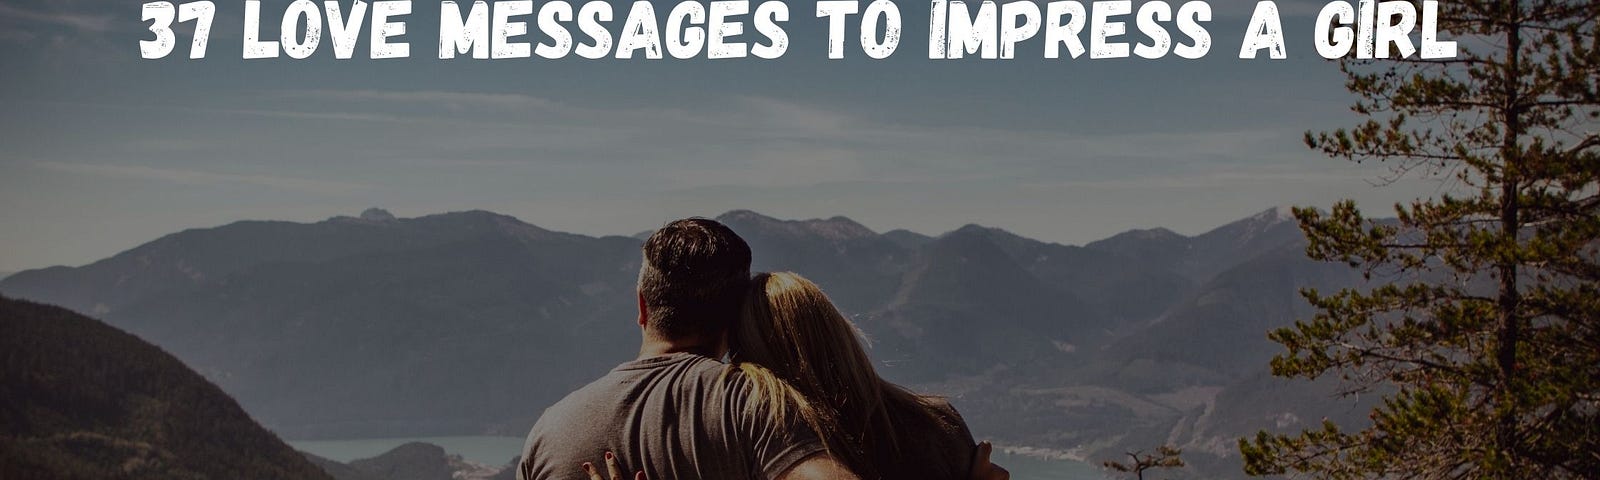 love messages to impress a girl